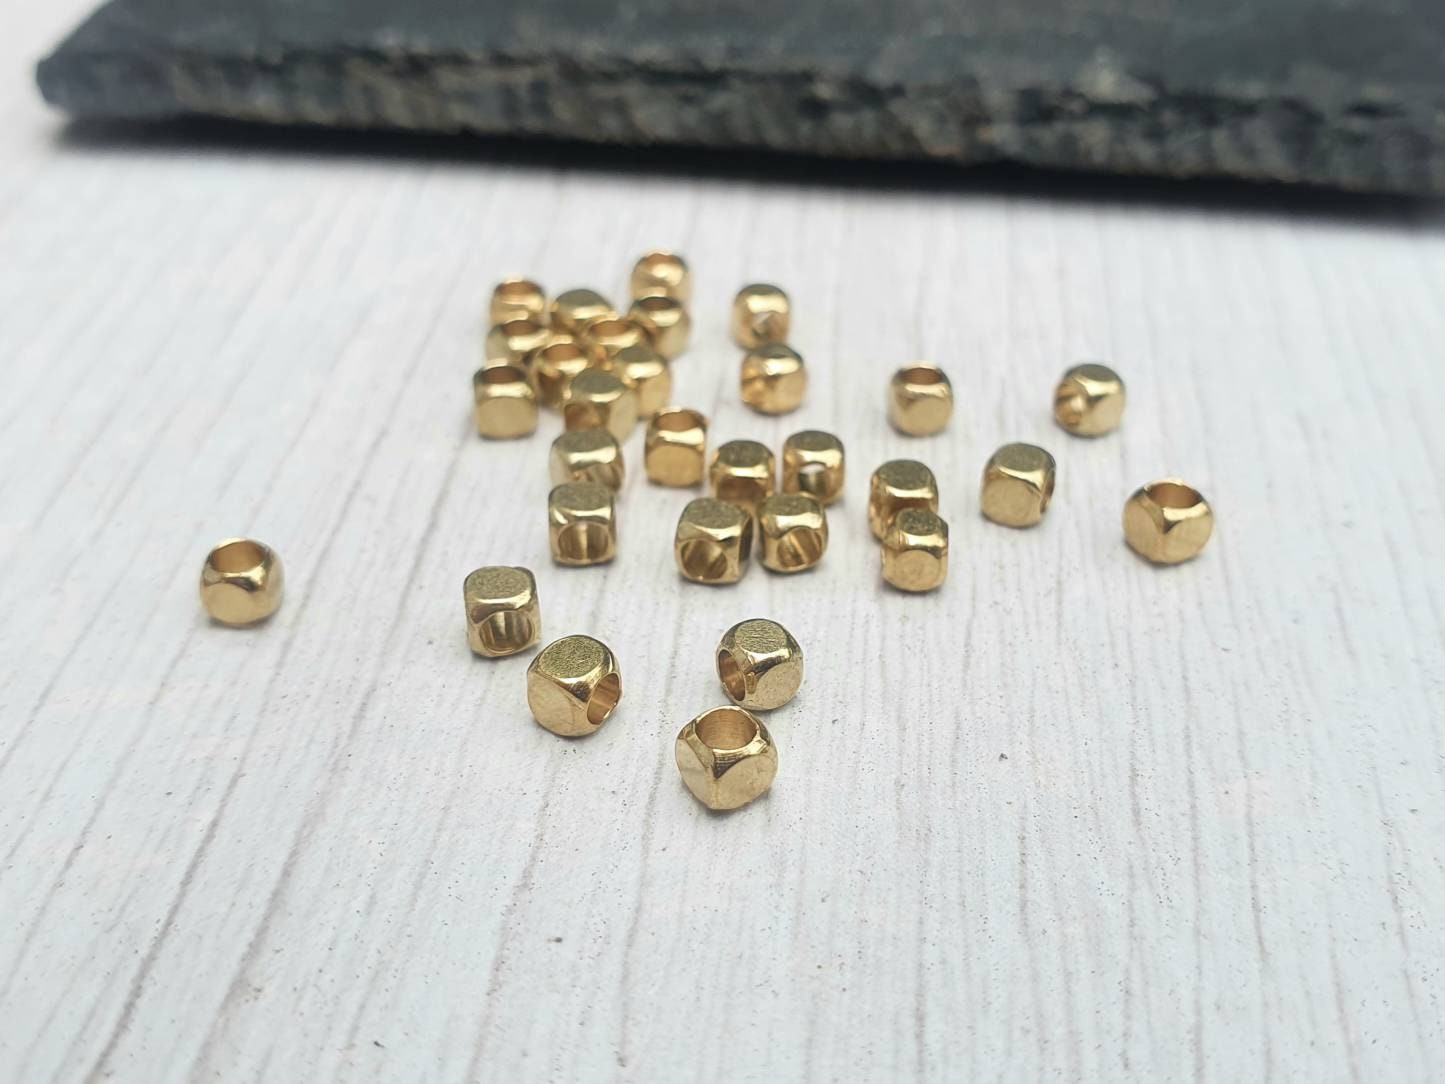  2240 Pieces Gold Spacer Beads and Gold Letter Beads for  Bracelets Making, Gold Bracelet Beads Include Round Beads, Flat Spacer  Beads and Alphabet Beads for Bracelets and Jewelry Making